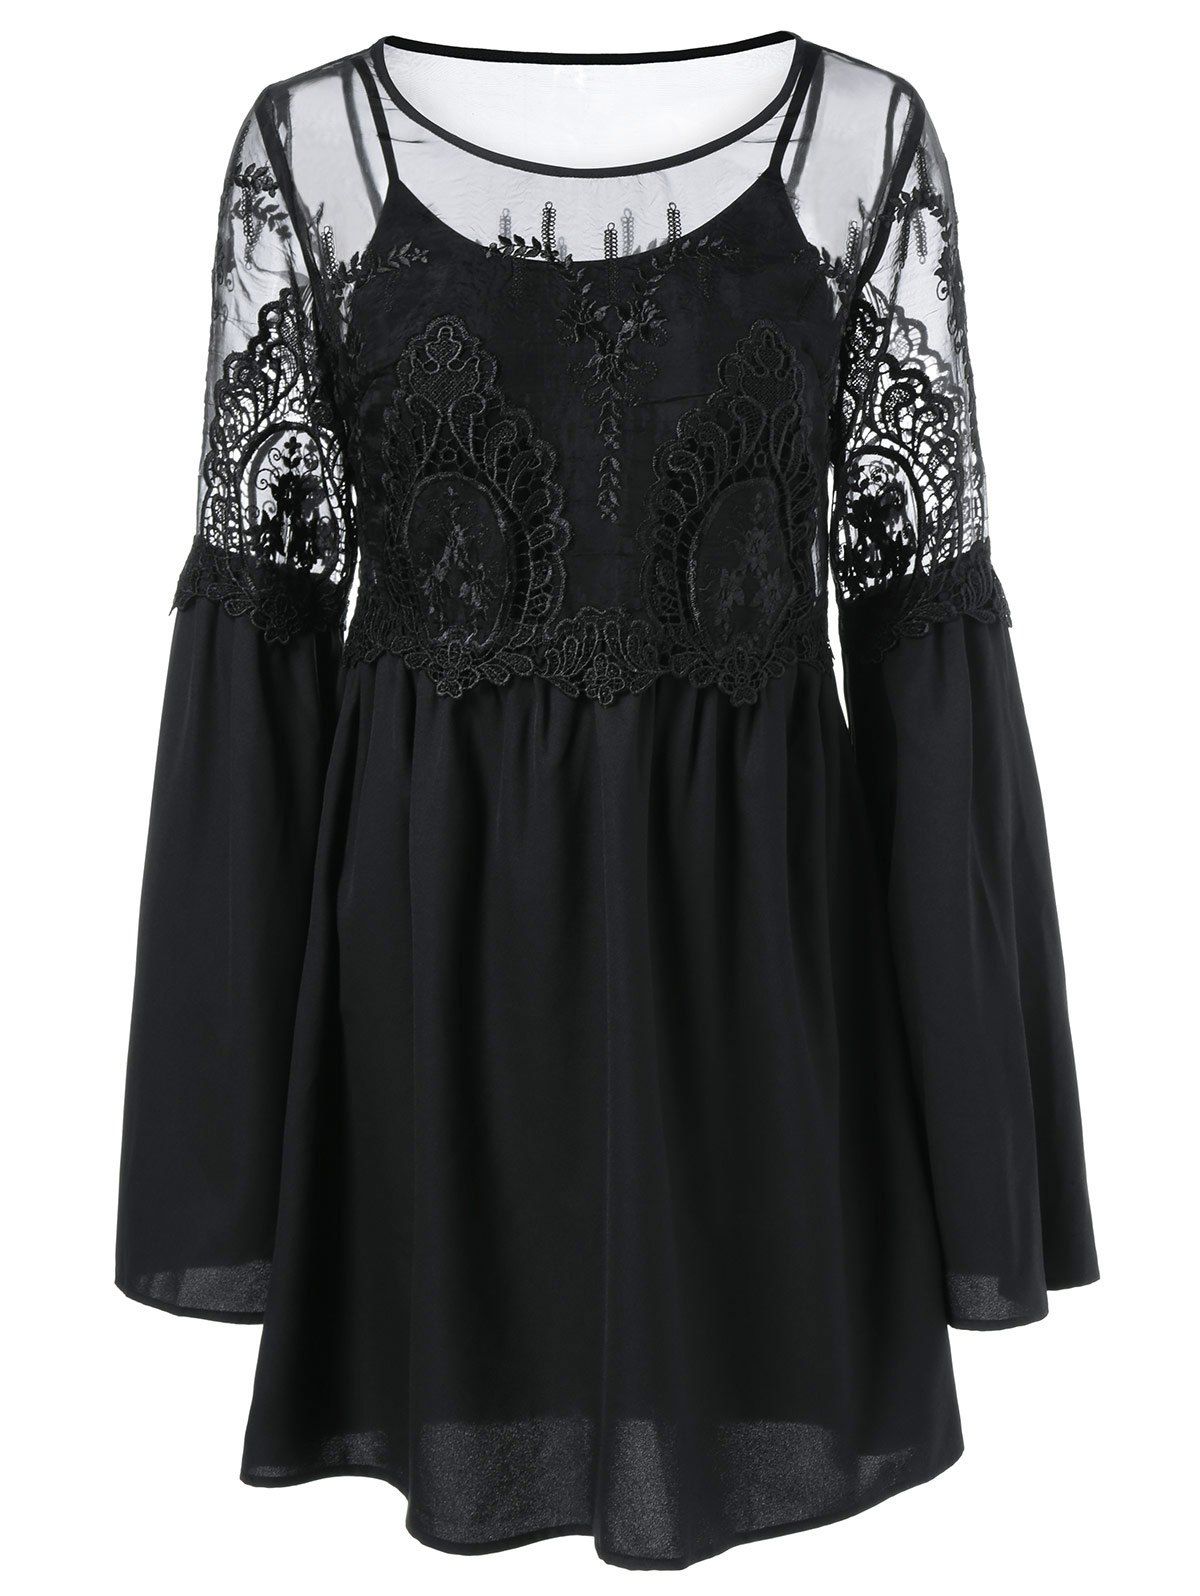 [17% OFF] 2021 Sheer Lace Patchwork Dress And Tank Top In BLACK | DressLily